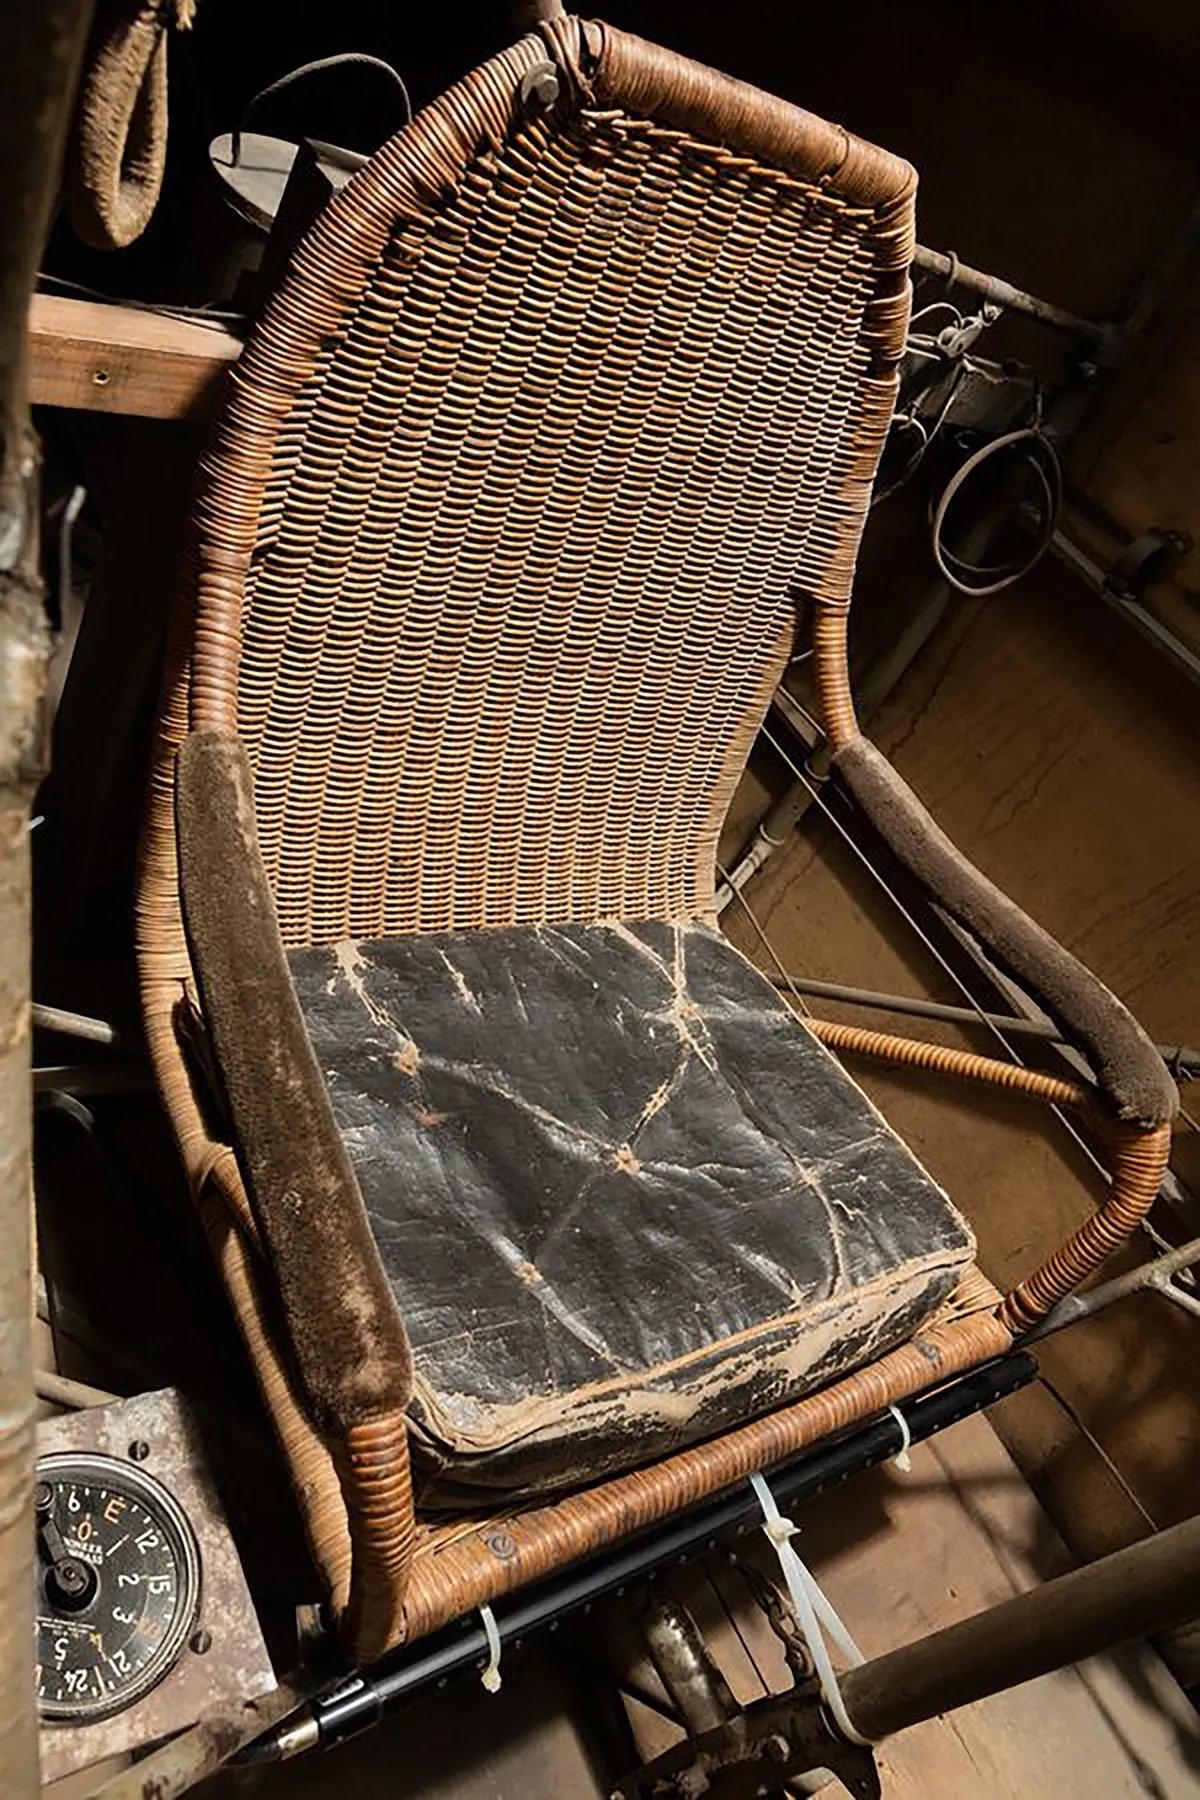 Worn-out wicker chair with a torn black seat, set in a rustic room with vintage objects